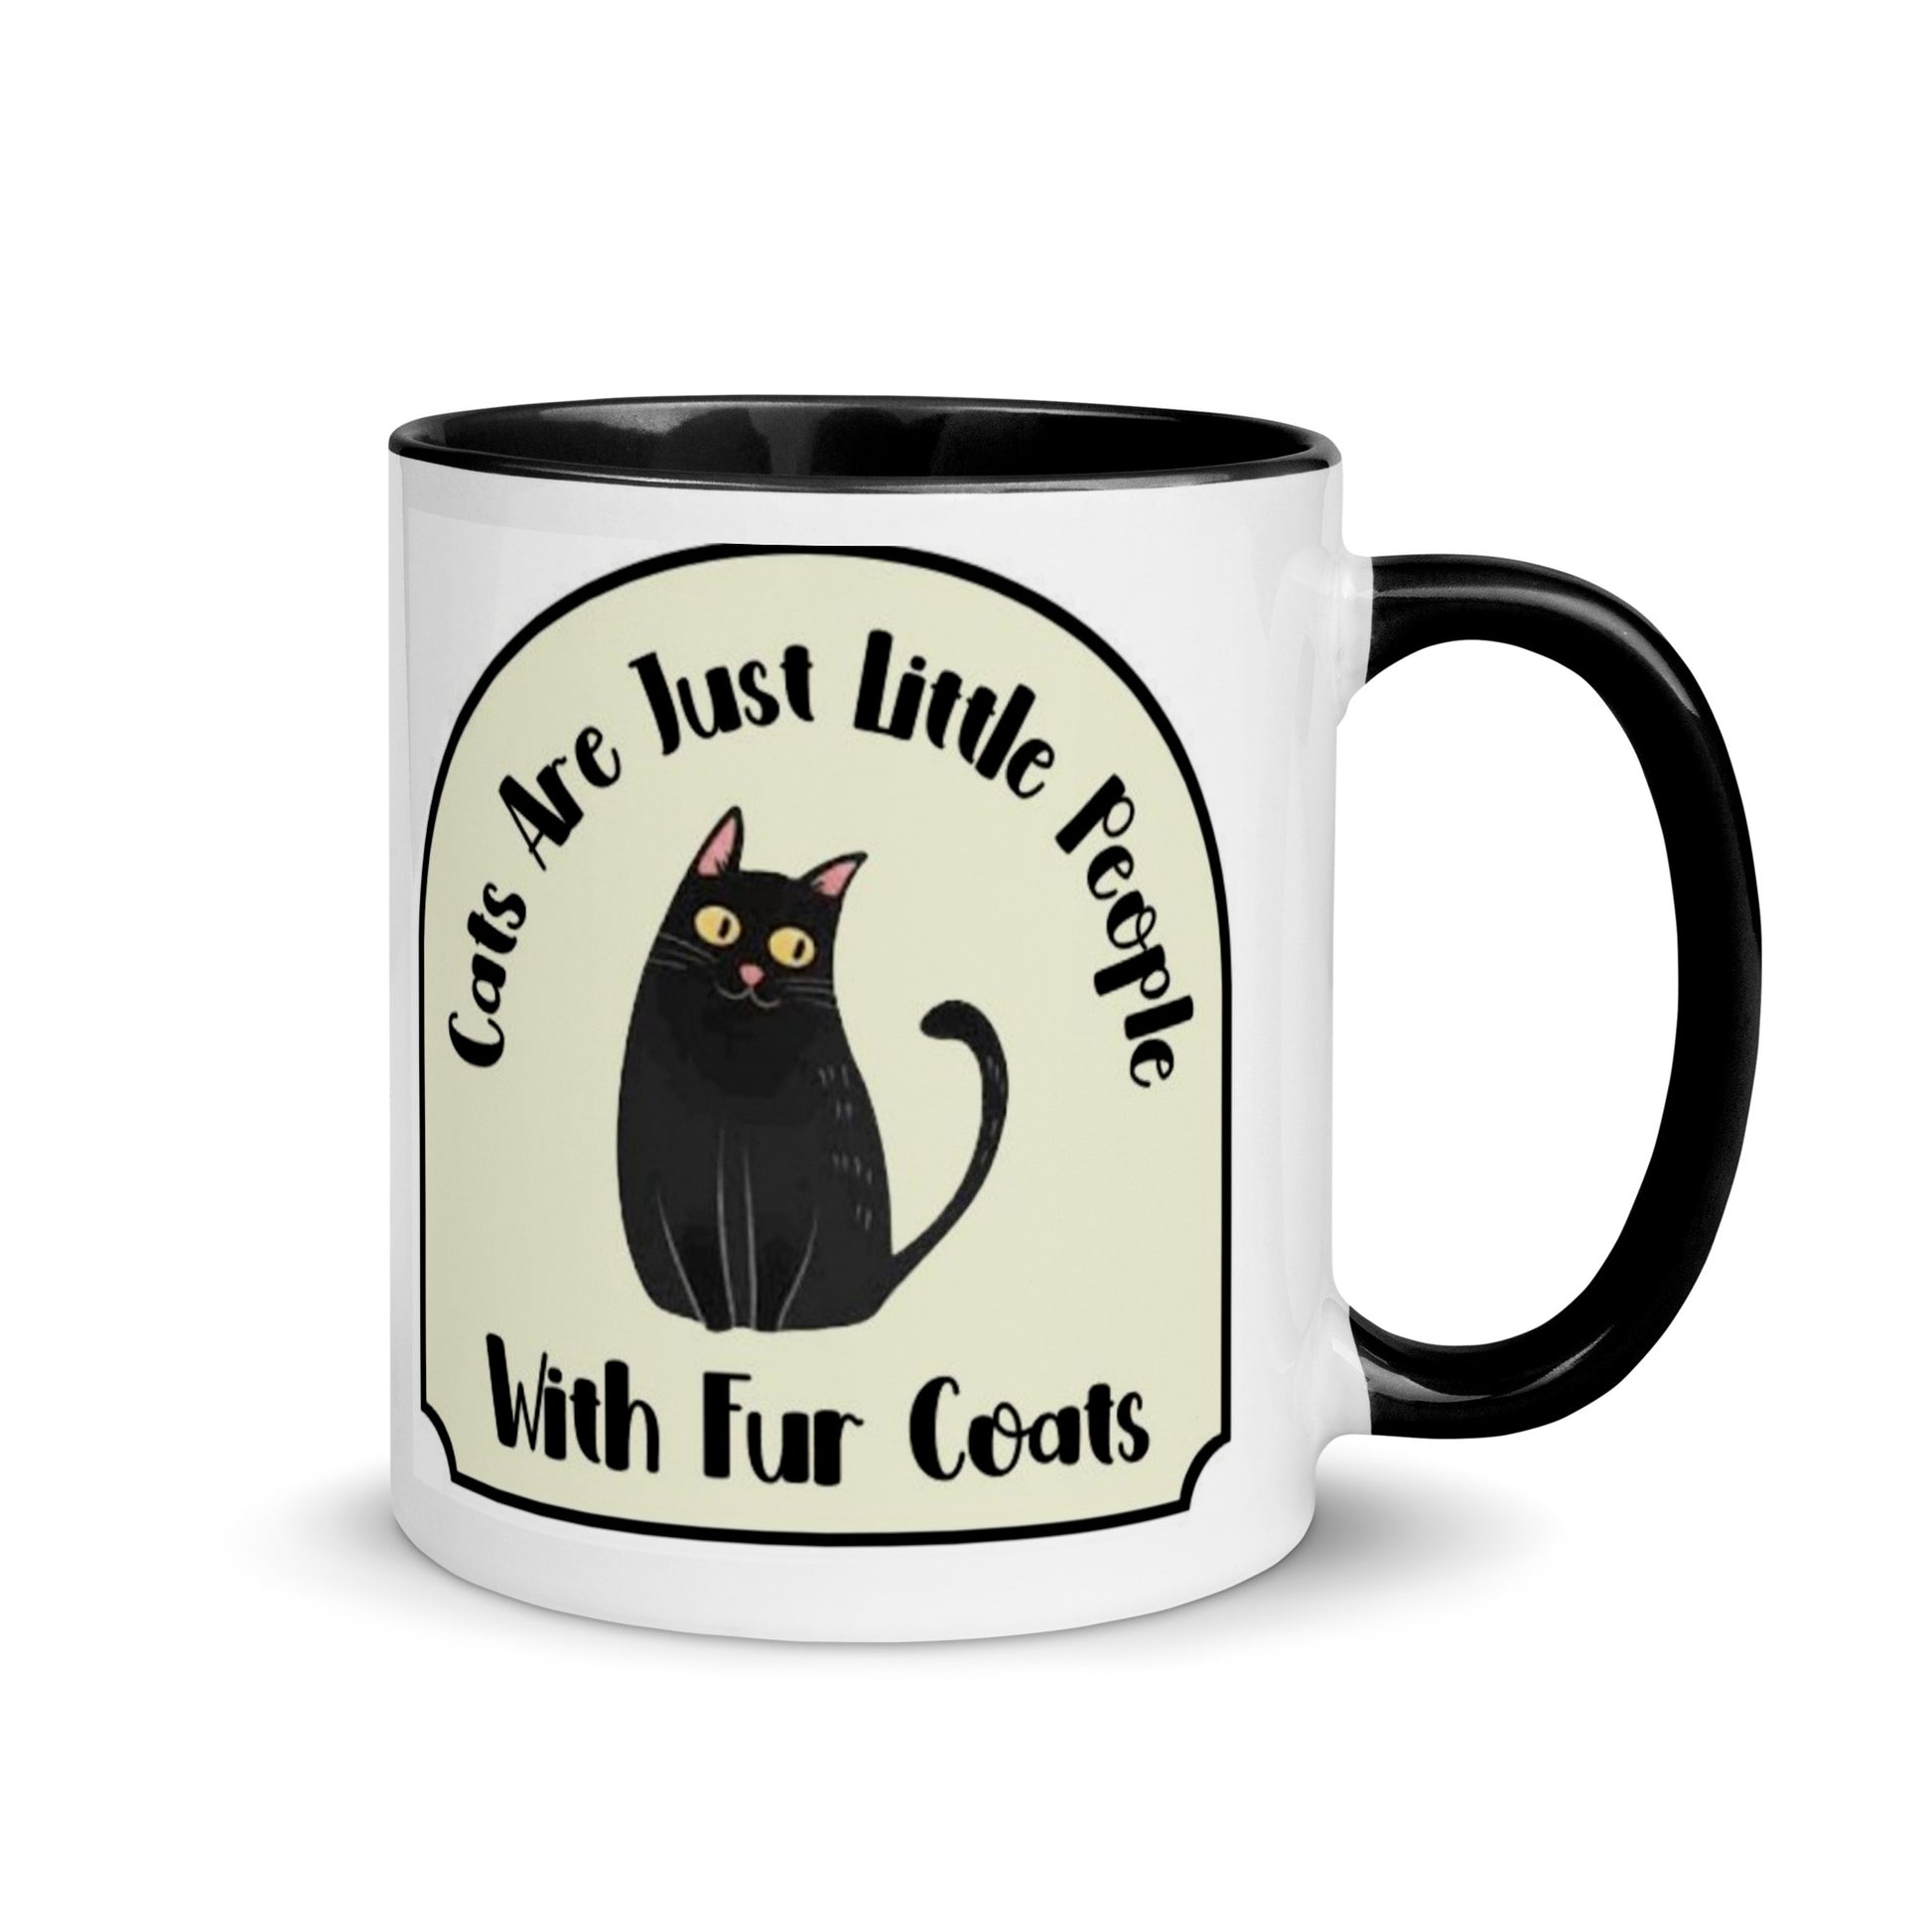 gift mug cats are just little people with fur coats